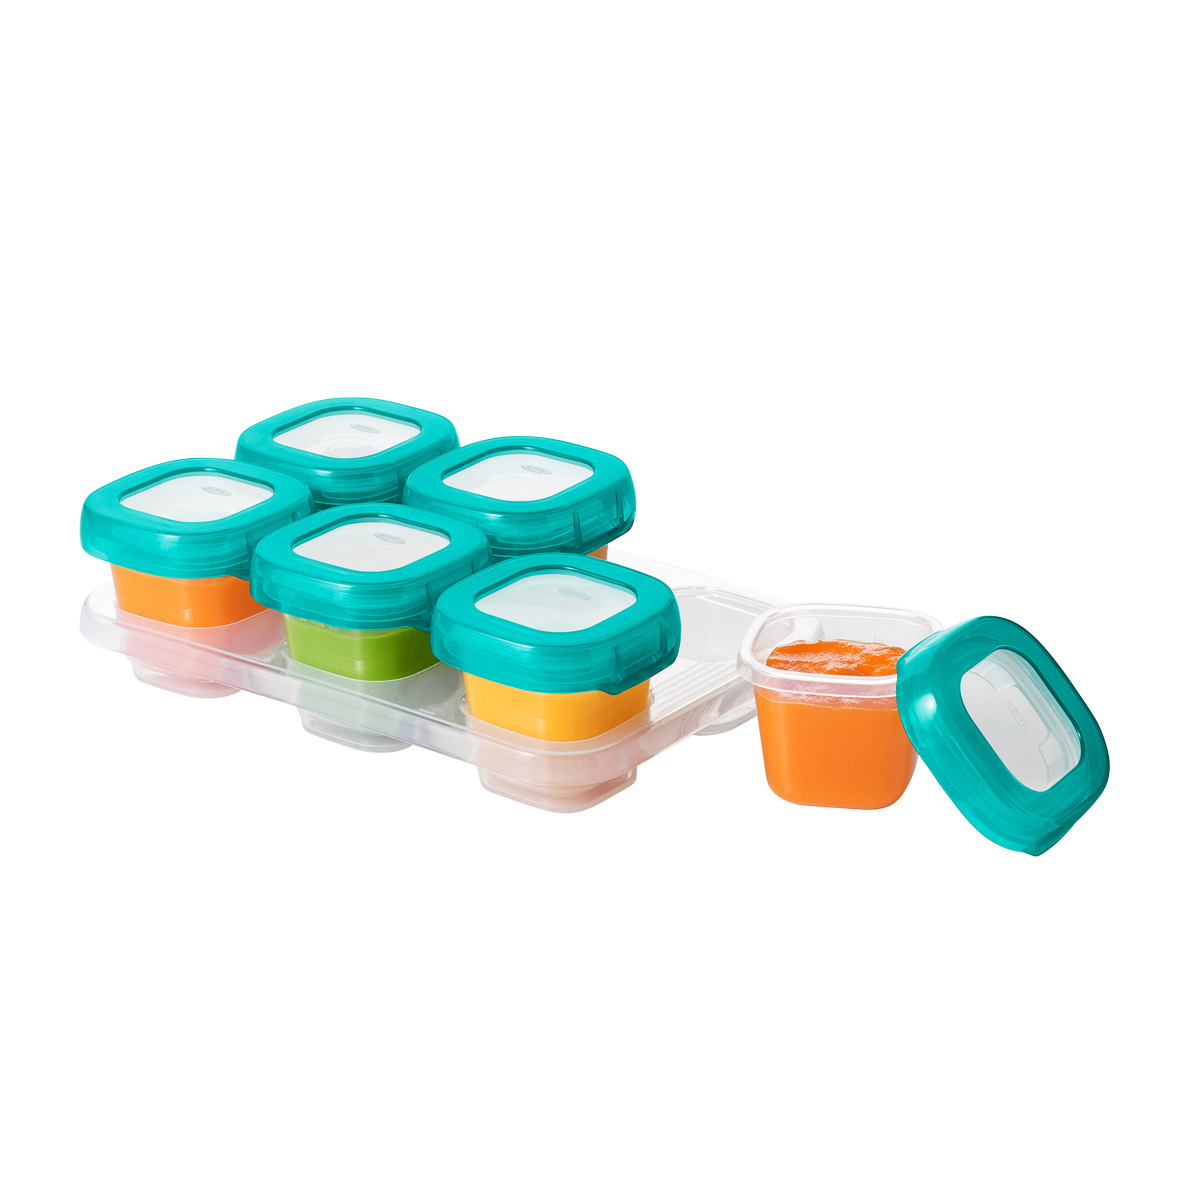 https://www.containerstore.com/catalogimages/517477/10083008-TOT-Silicone-Baby-Food-Bloc.jpg